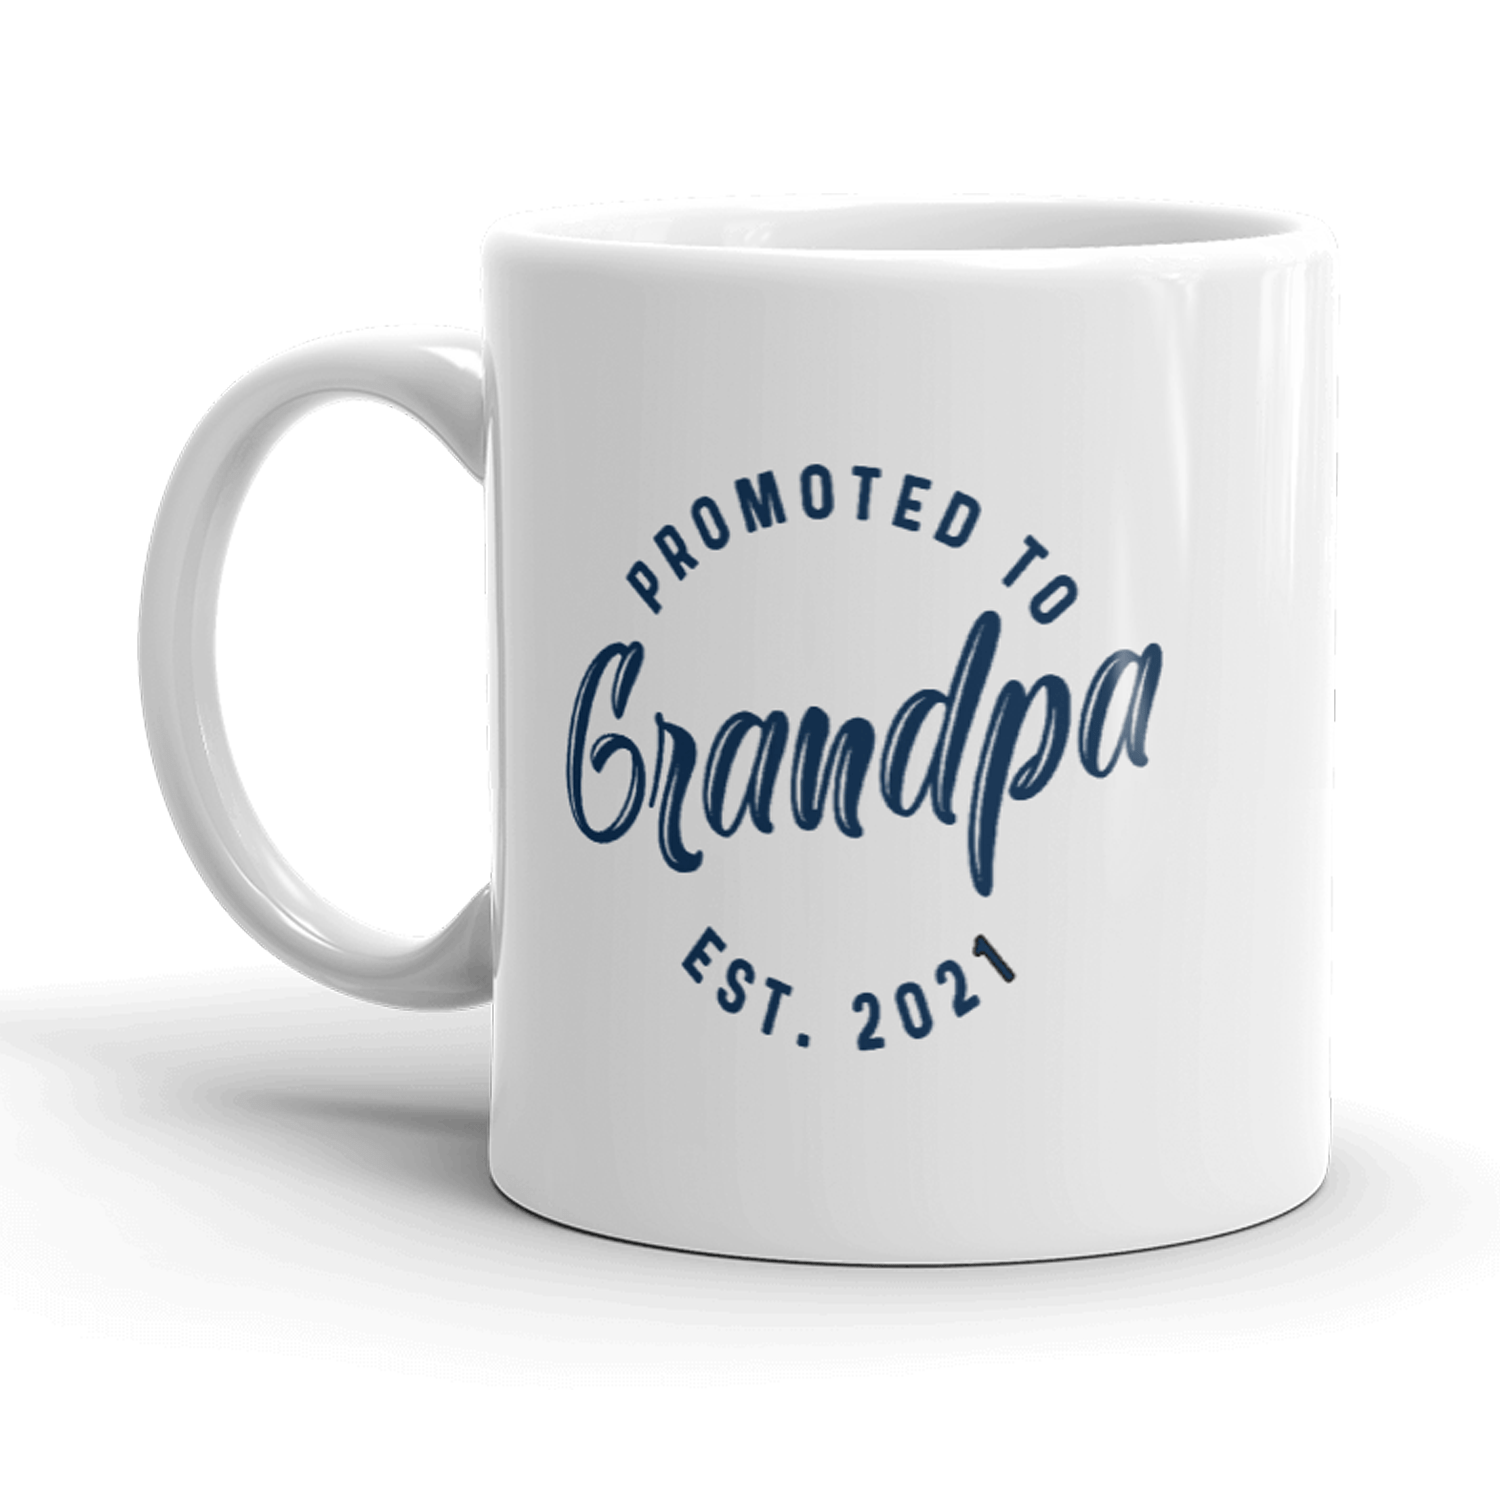 Promoted To Grandpa 2021 Mug Funny New Baby Family Graphic Coffee Cup-11oz - Crazy Dog T-Shirts